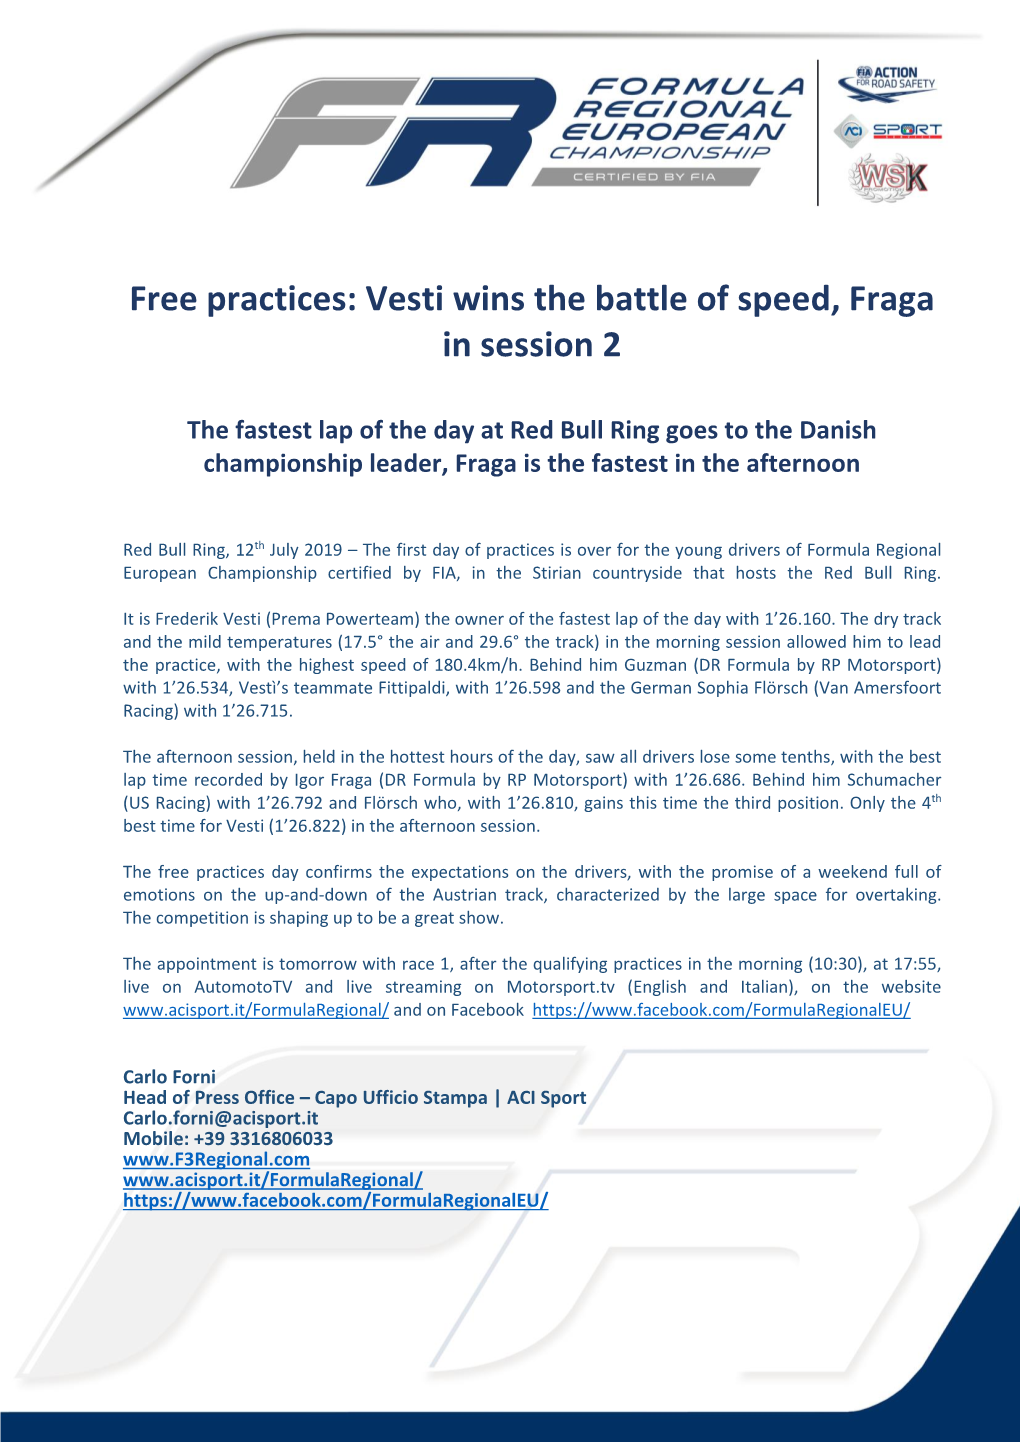 Vesti Wins the Battle of Speed, Fraga in Session 2